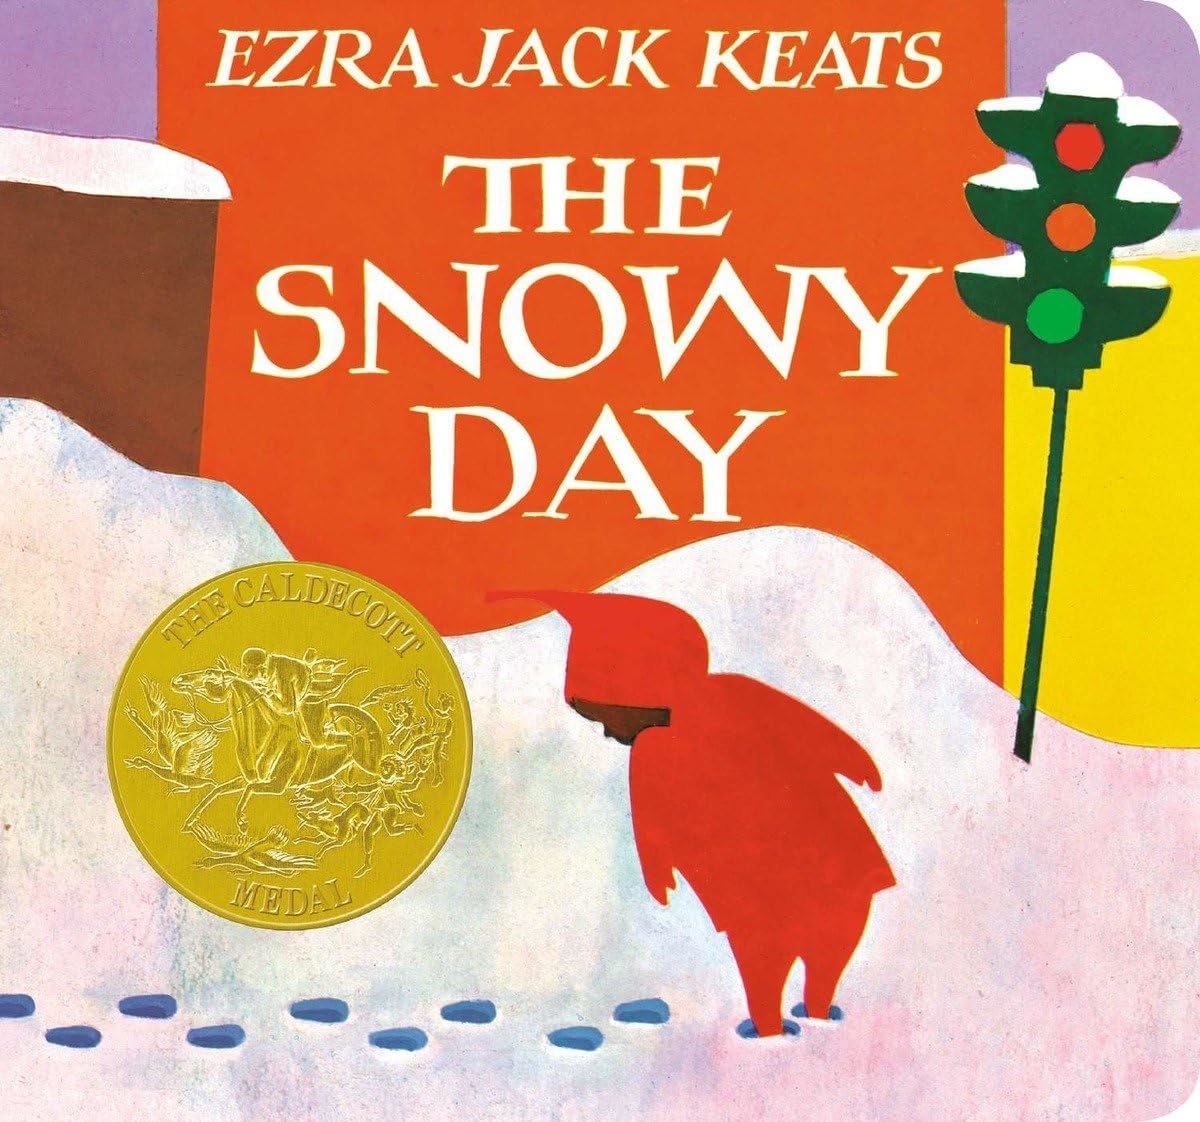 Book cover of &quot;The Snowy Day&quot; by Ezra Jack Keats showing a child in a red hooded coat with a Caldecott Medal